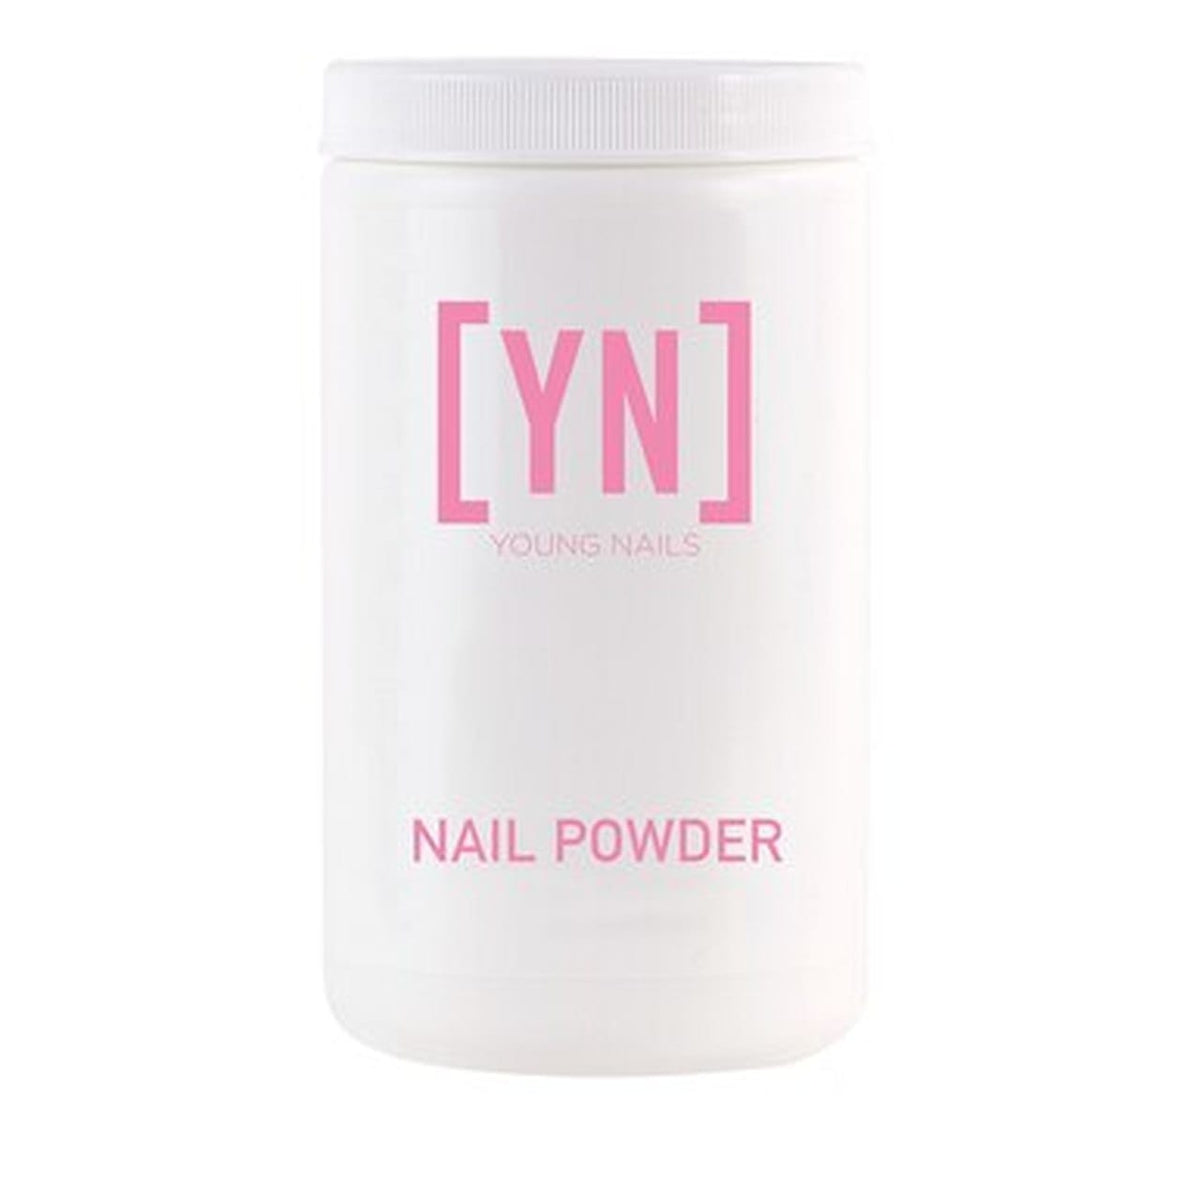 660g Speed White Powder Nails - Young Nails - Luxe Pacifique